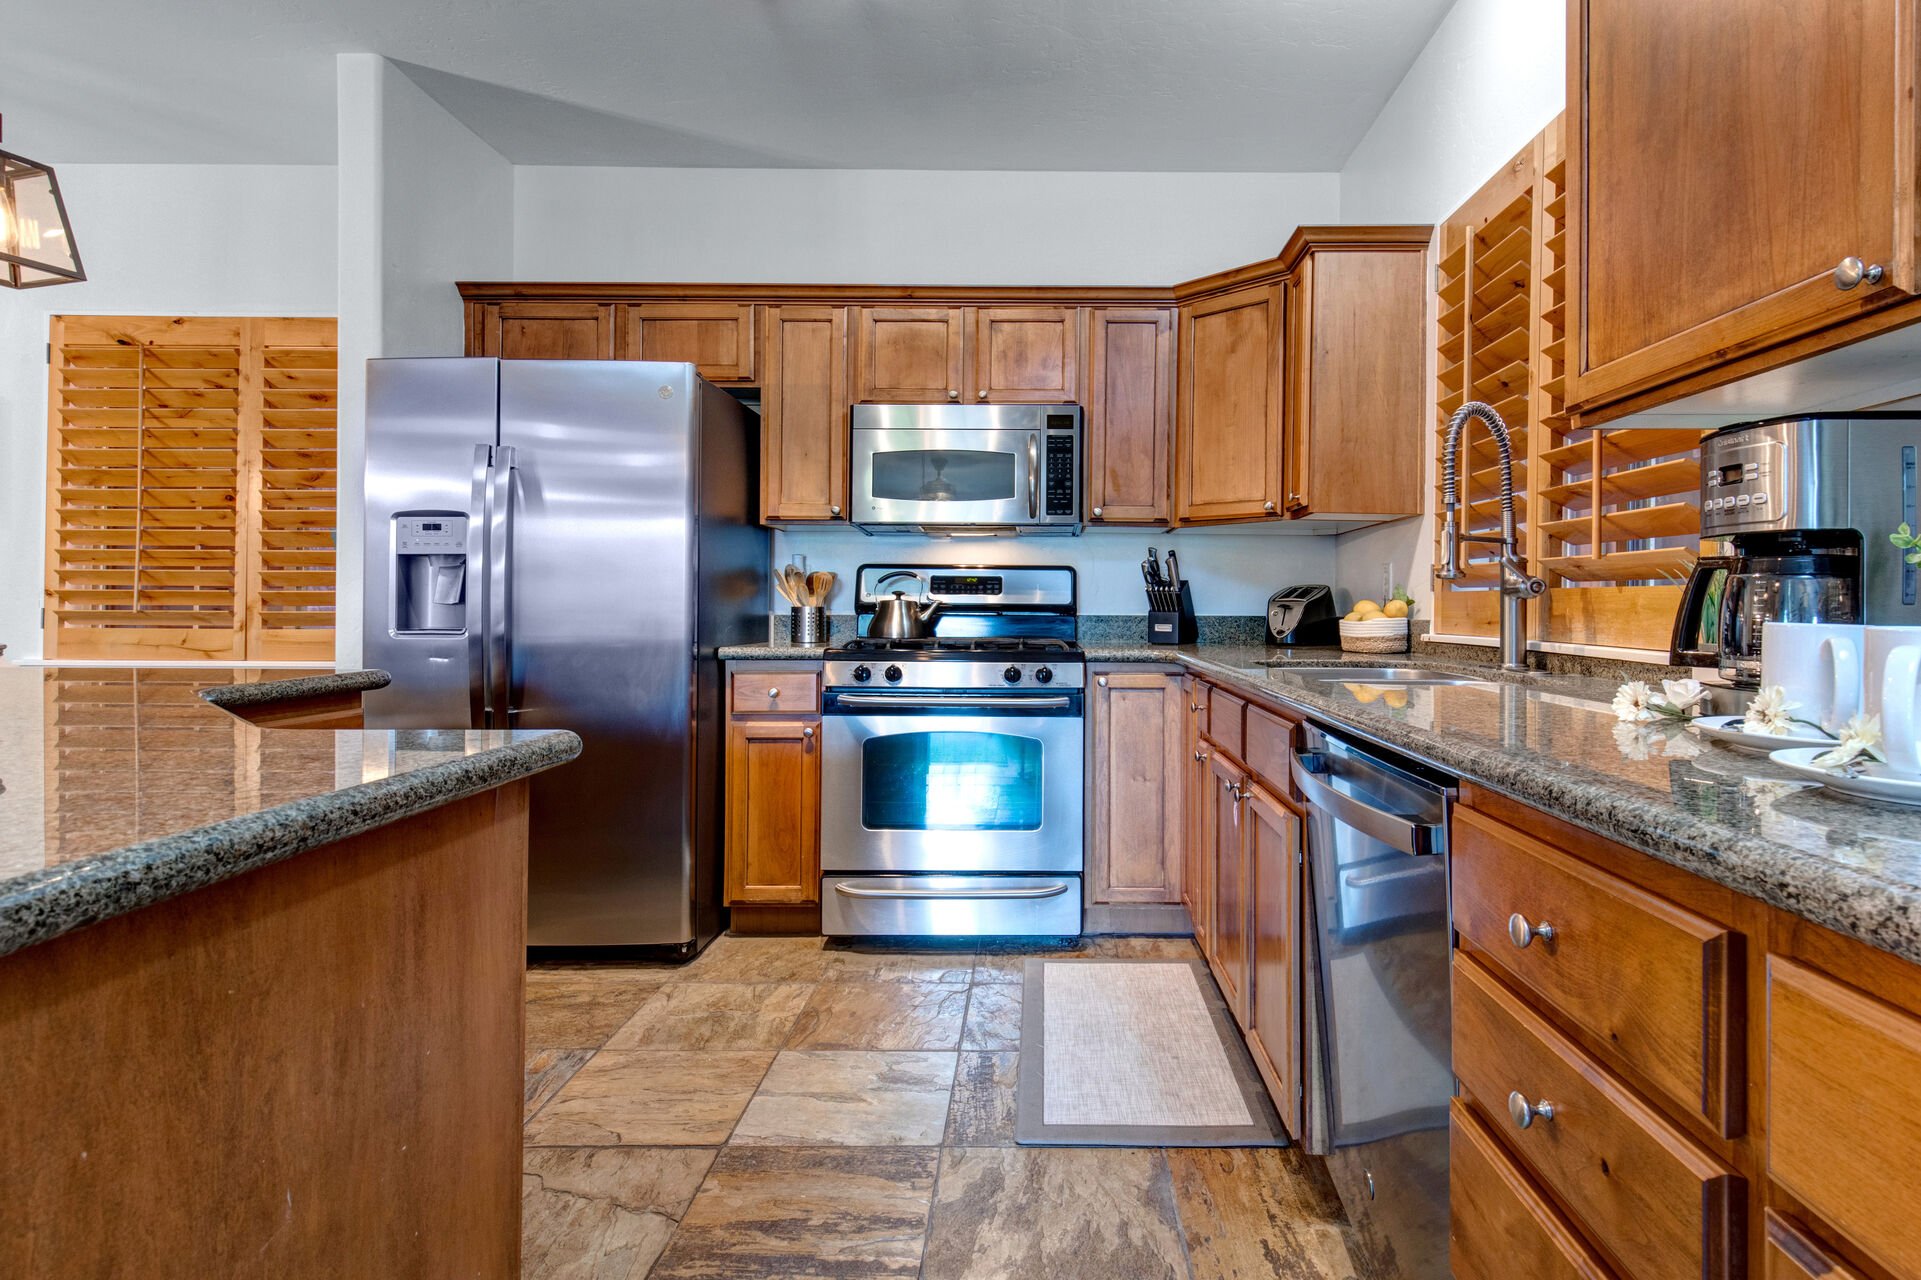 Fully Equipped Kitchen with beautiful stone countertops, stainless steel appliances, ice maker, and island seating for four